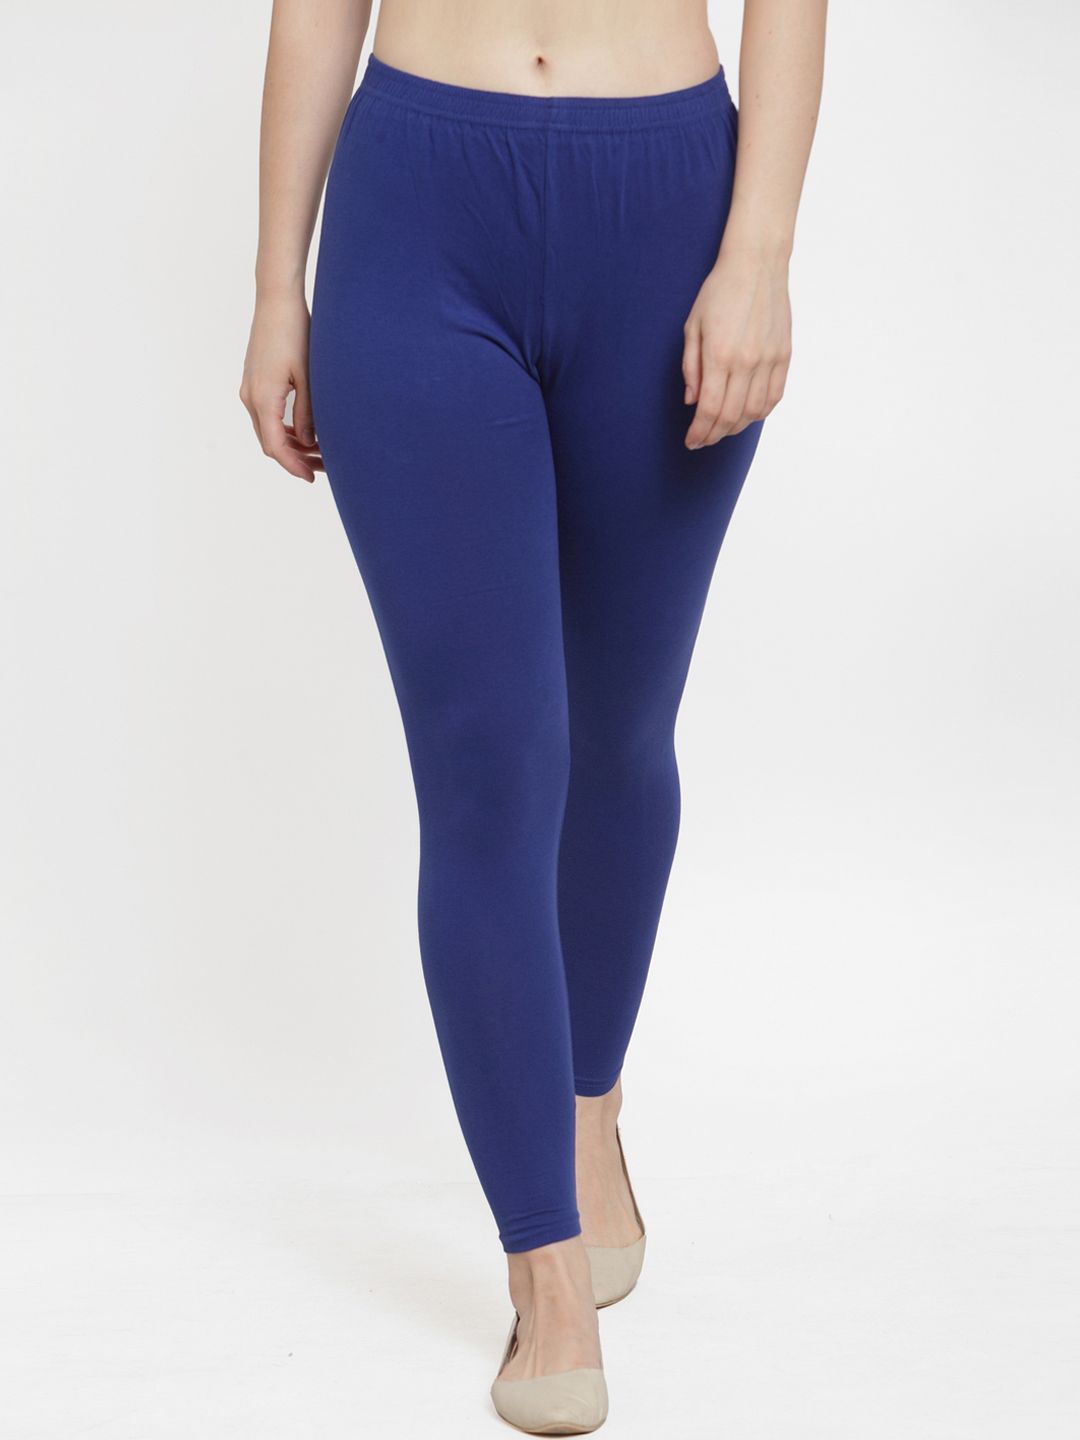 GRACIT Women Blue Solid Ankle-Length Leggings Price in India